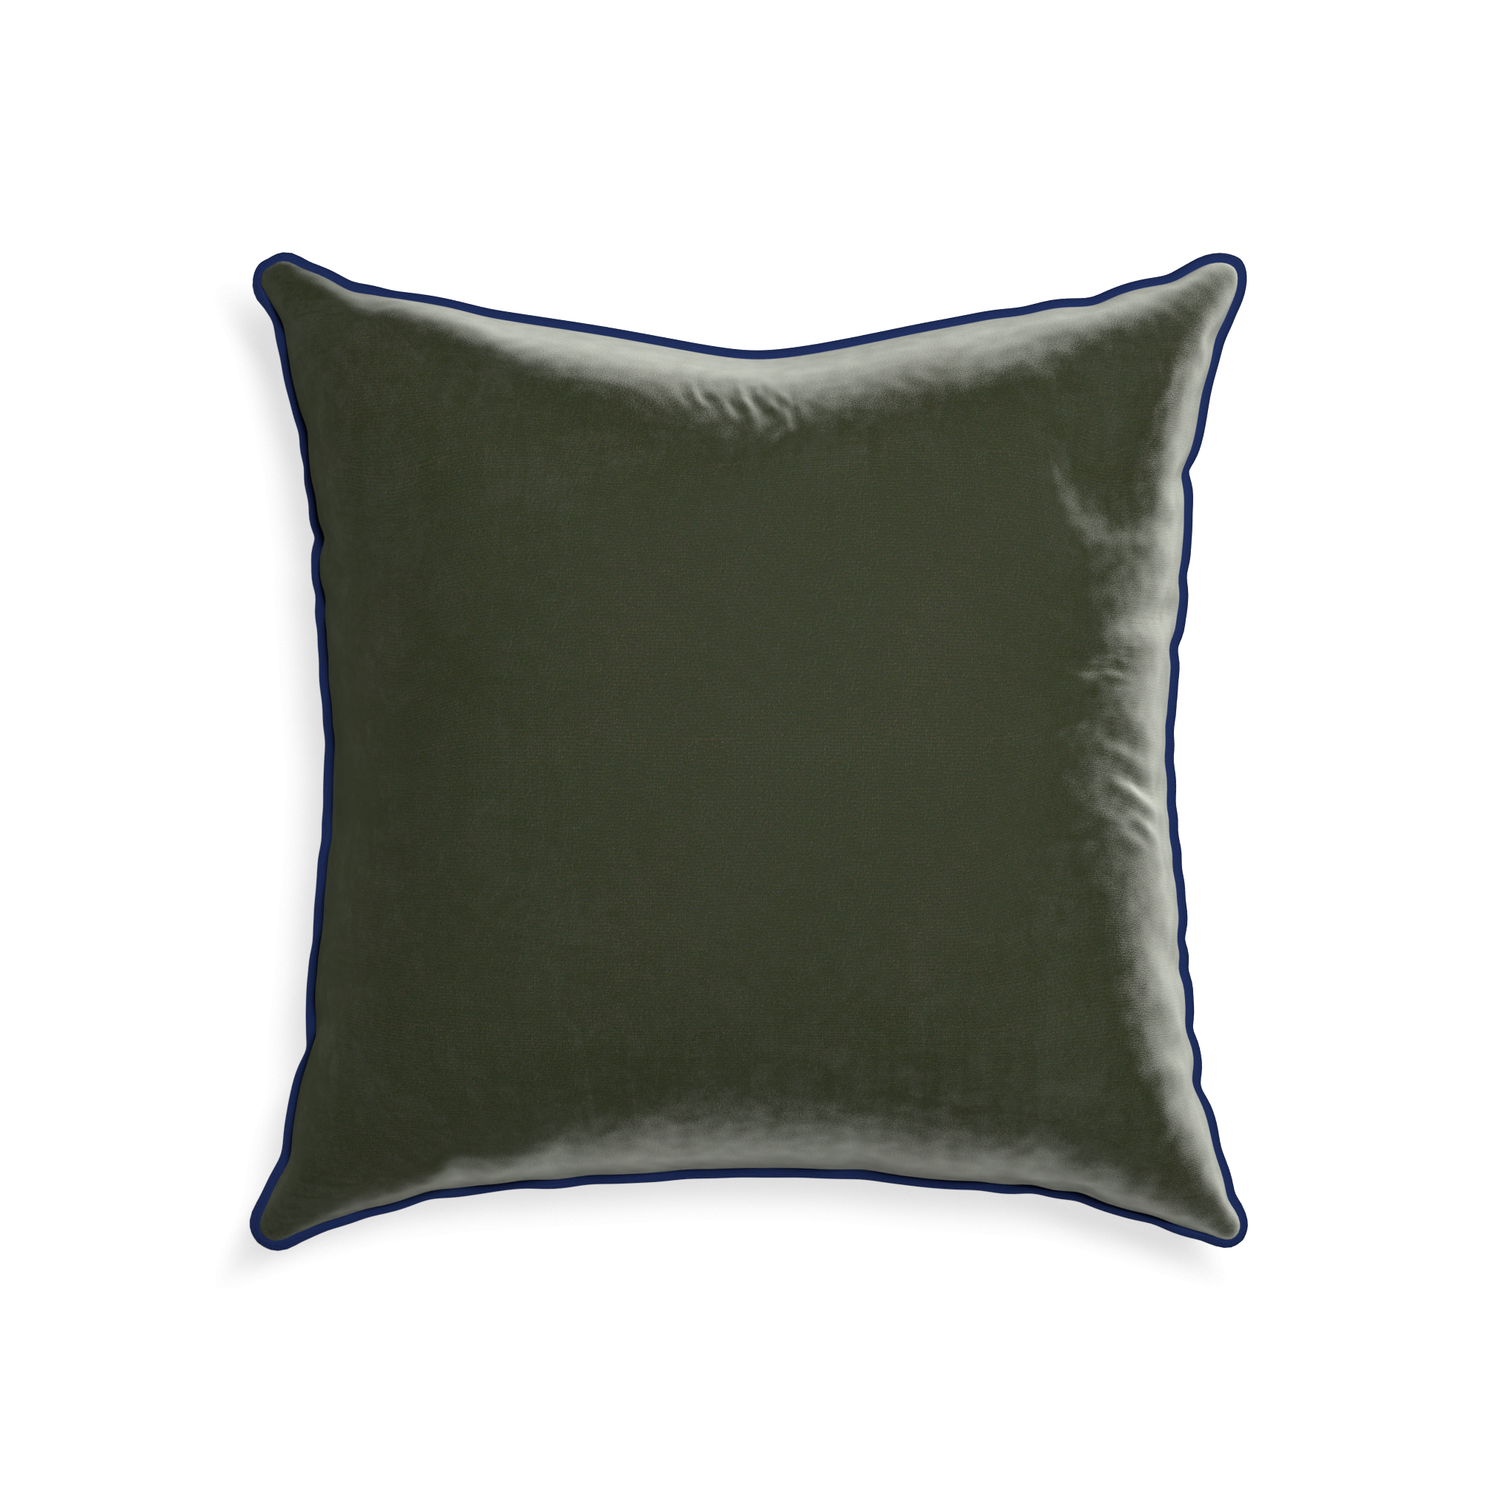 22-square fern velvet custom fern greenpillow with midnight piping on white background